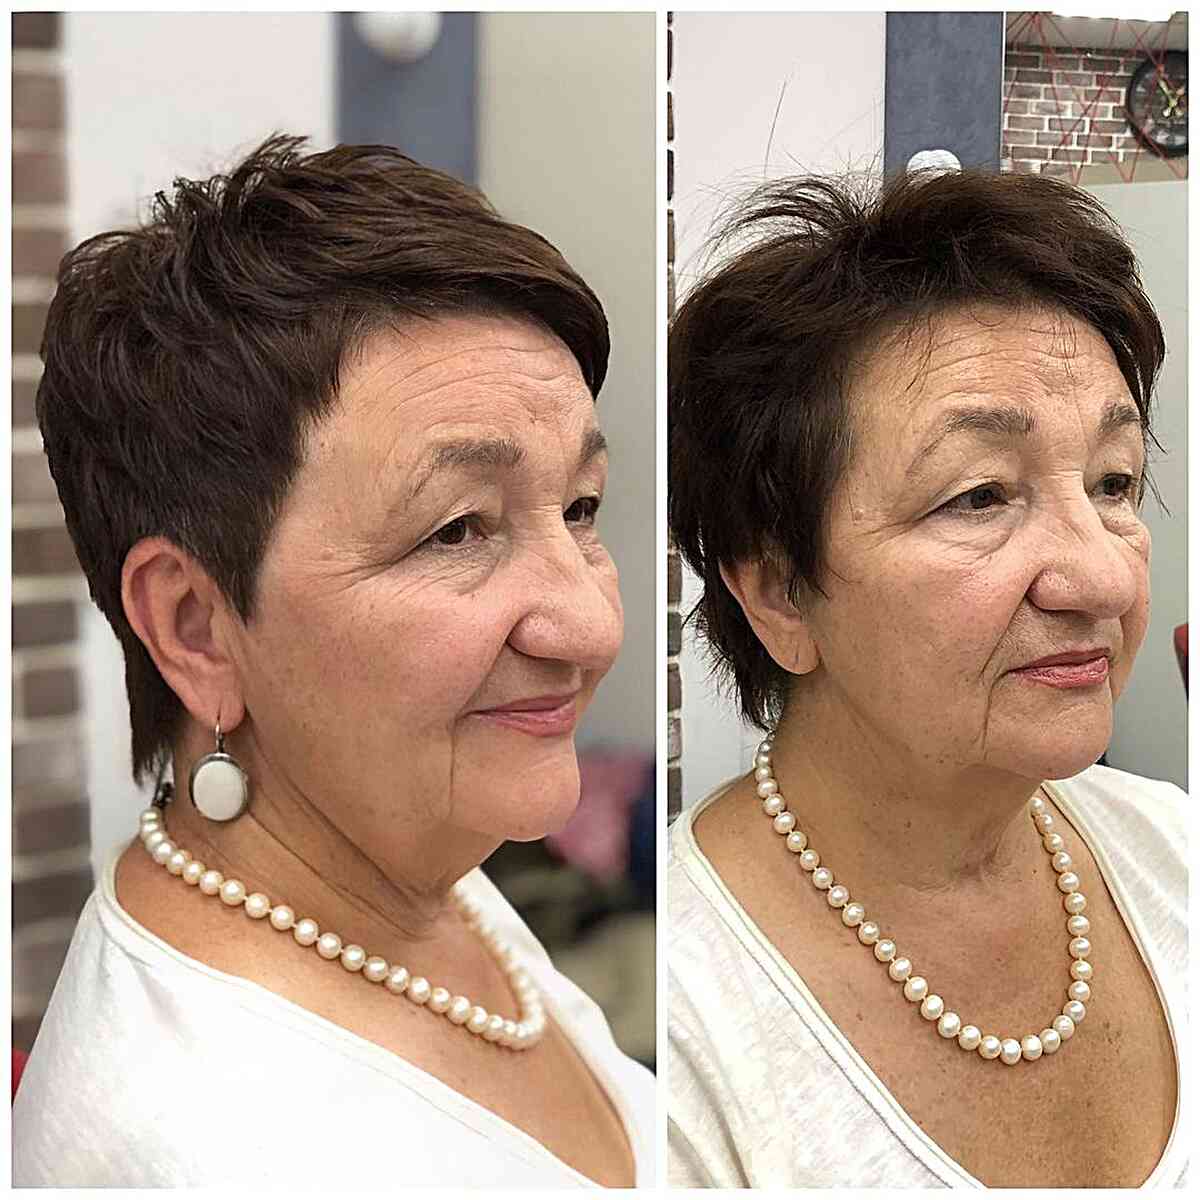 Short Brown Pixie Cut for Ladies Over 60 with Fuller Faces